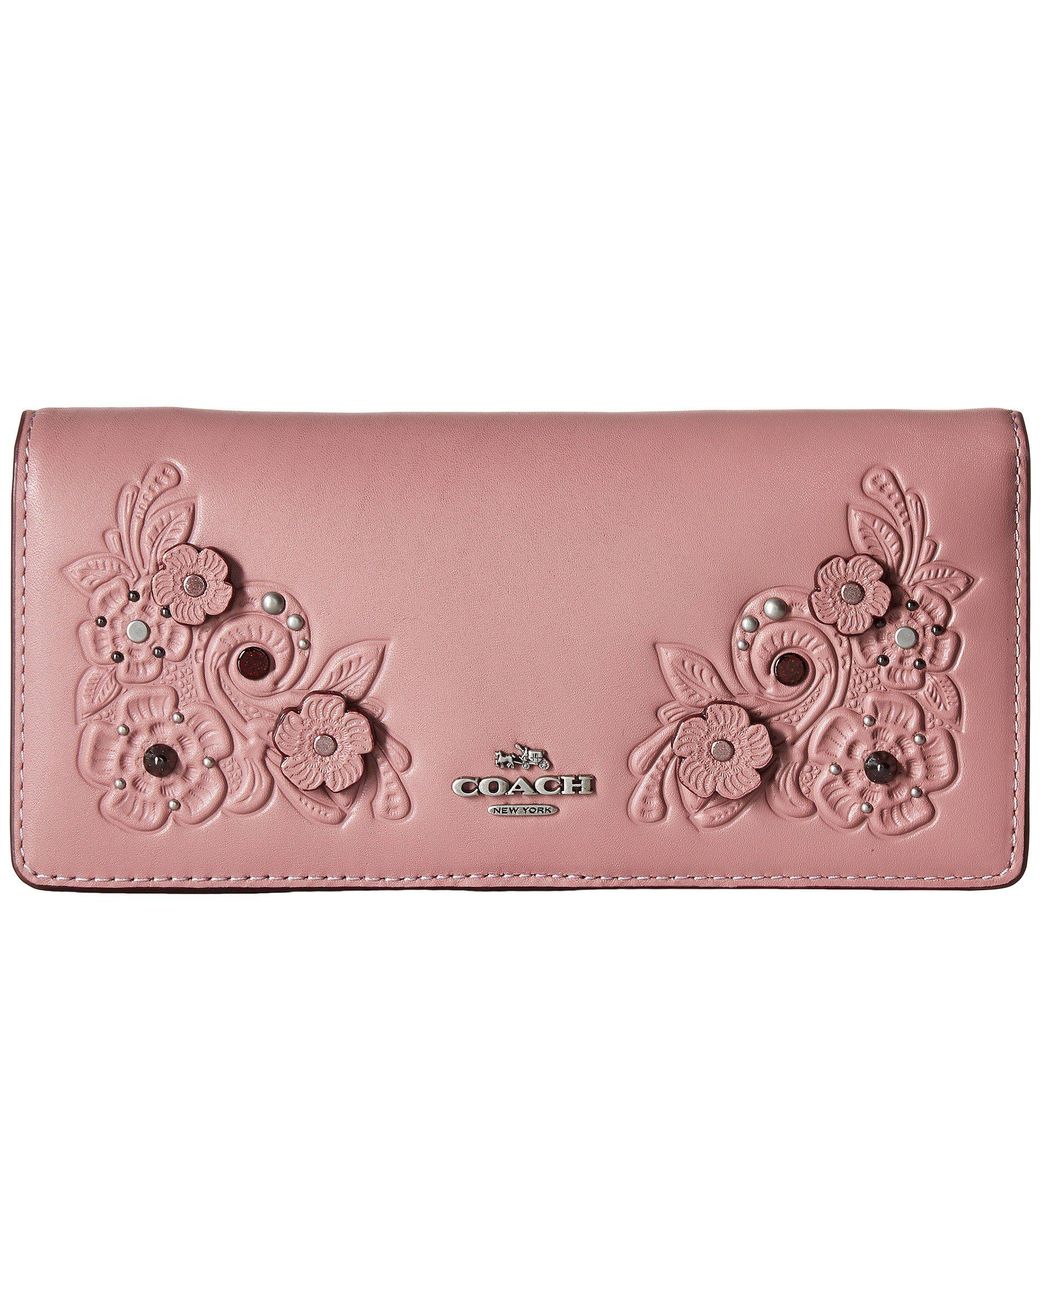 COACH Tea Rose Tooling With Applique Slim Wallet in Pink | Lyst